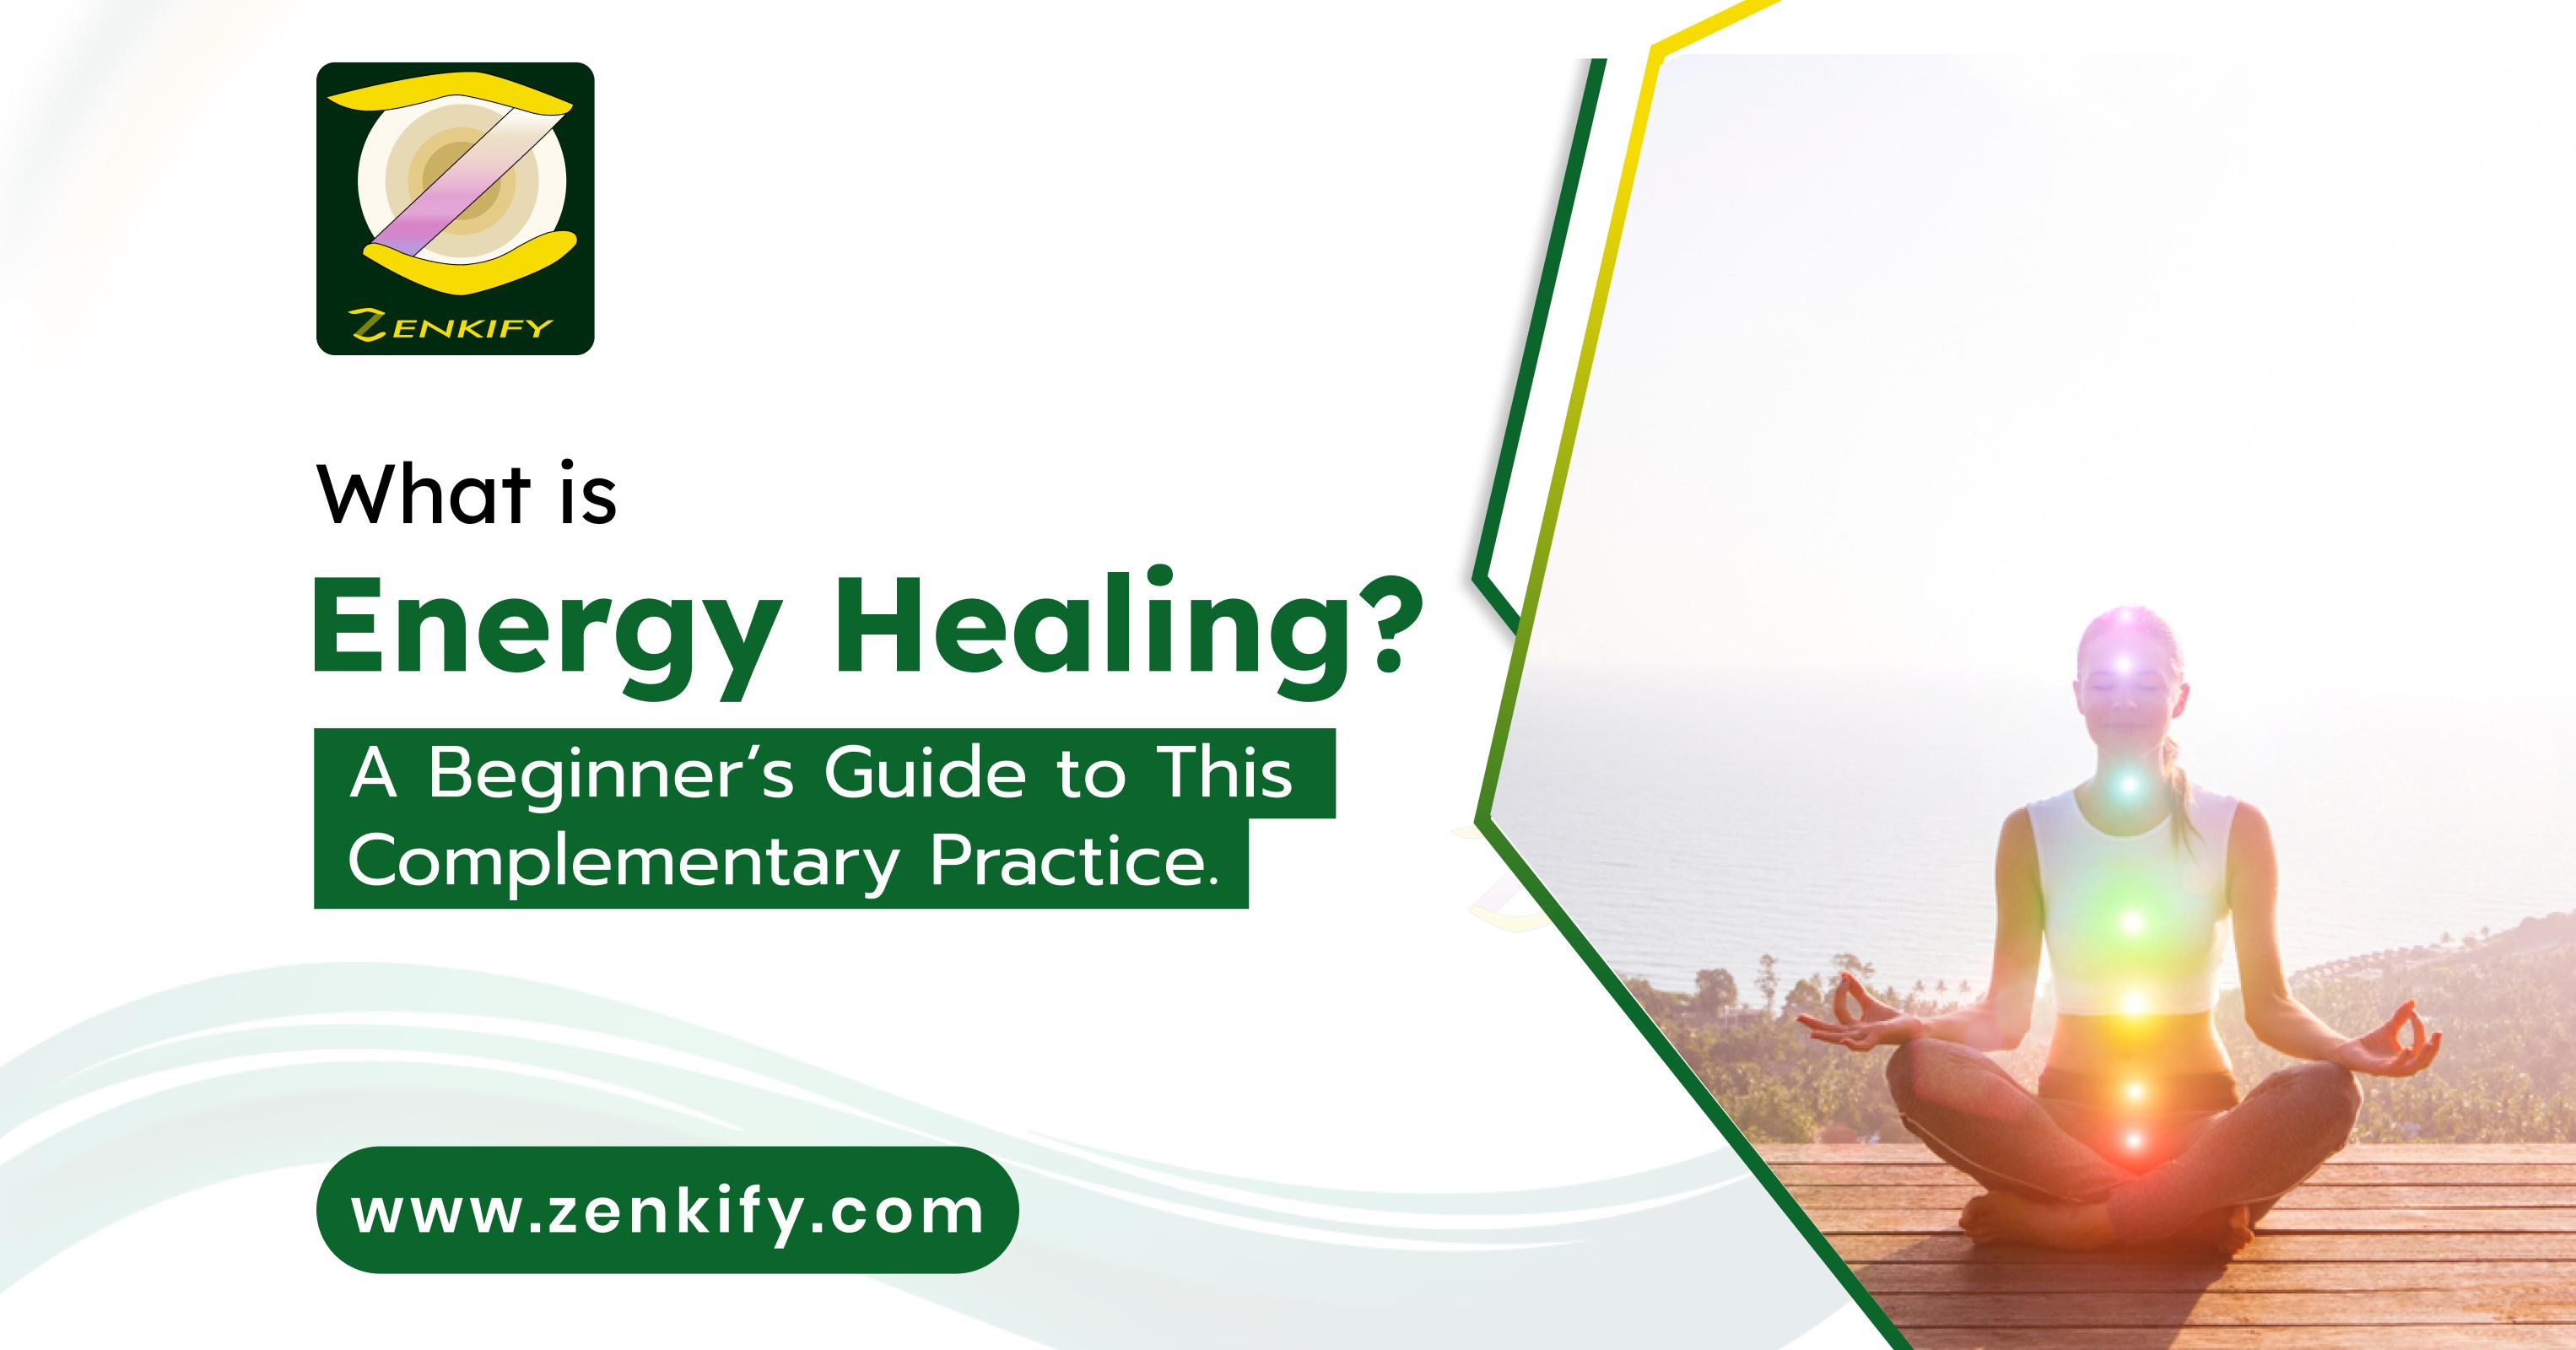 What Is Energy Healing? Discover the Basics – A Beginner’s Guide